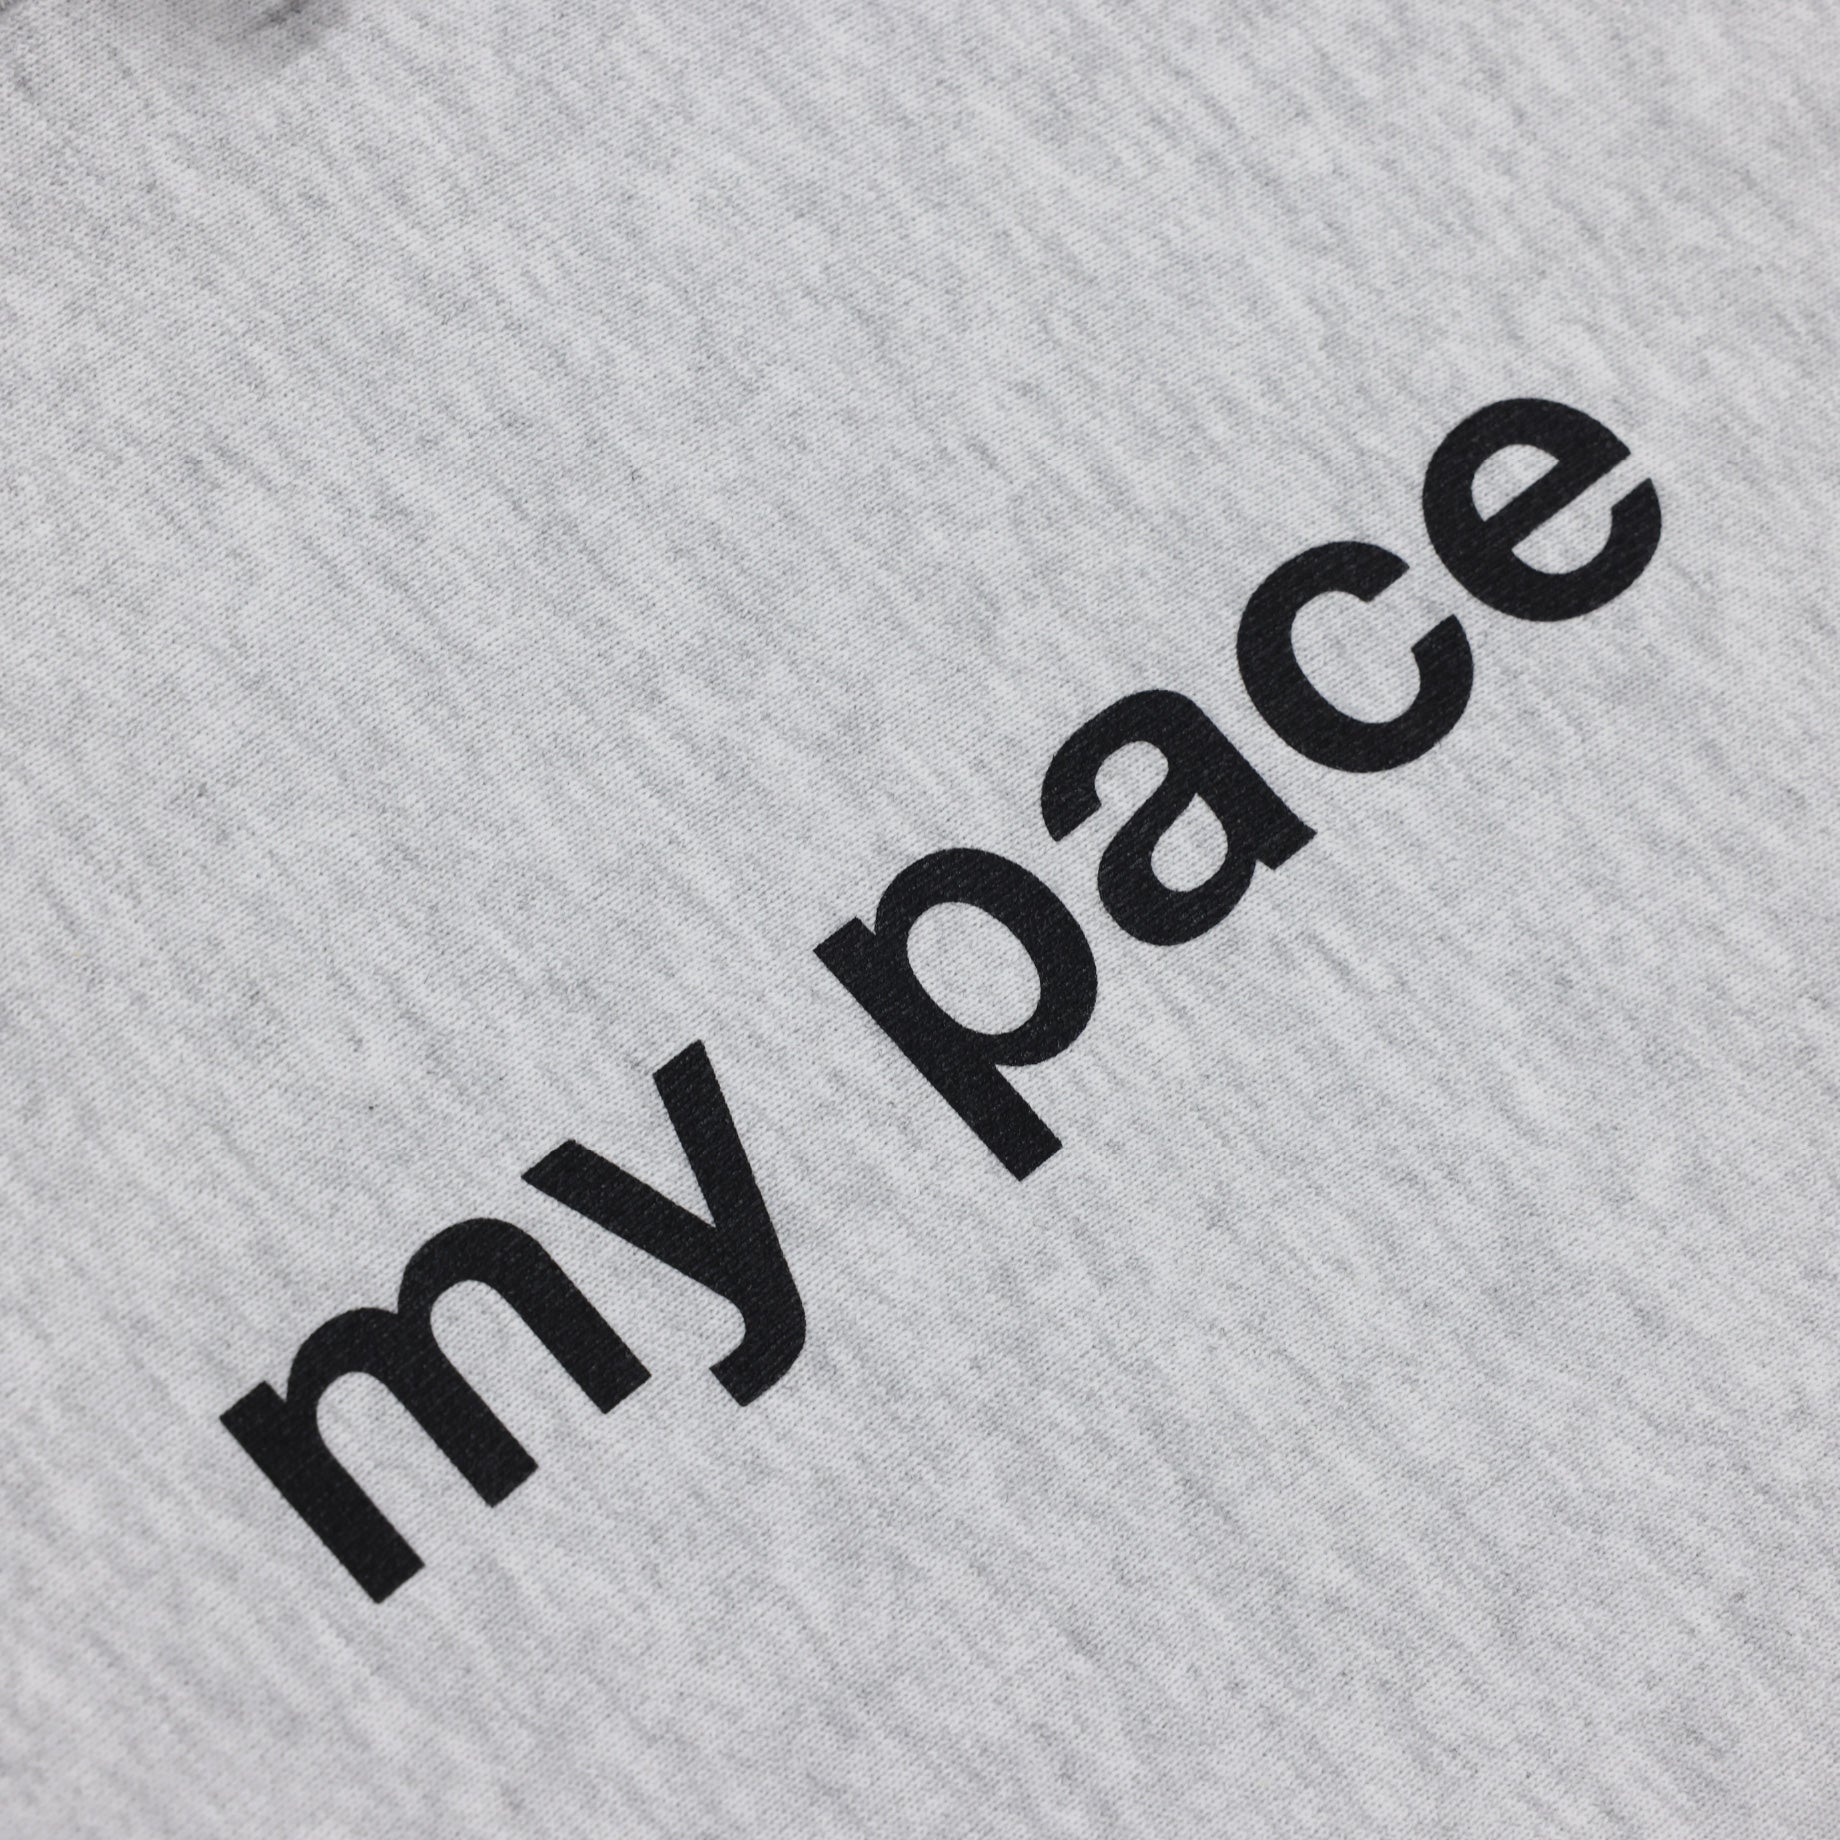 MY PACE #02 HOODED SWEAT (GRAY)